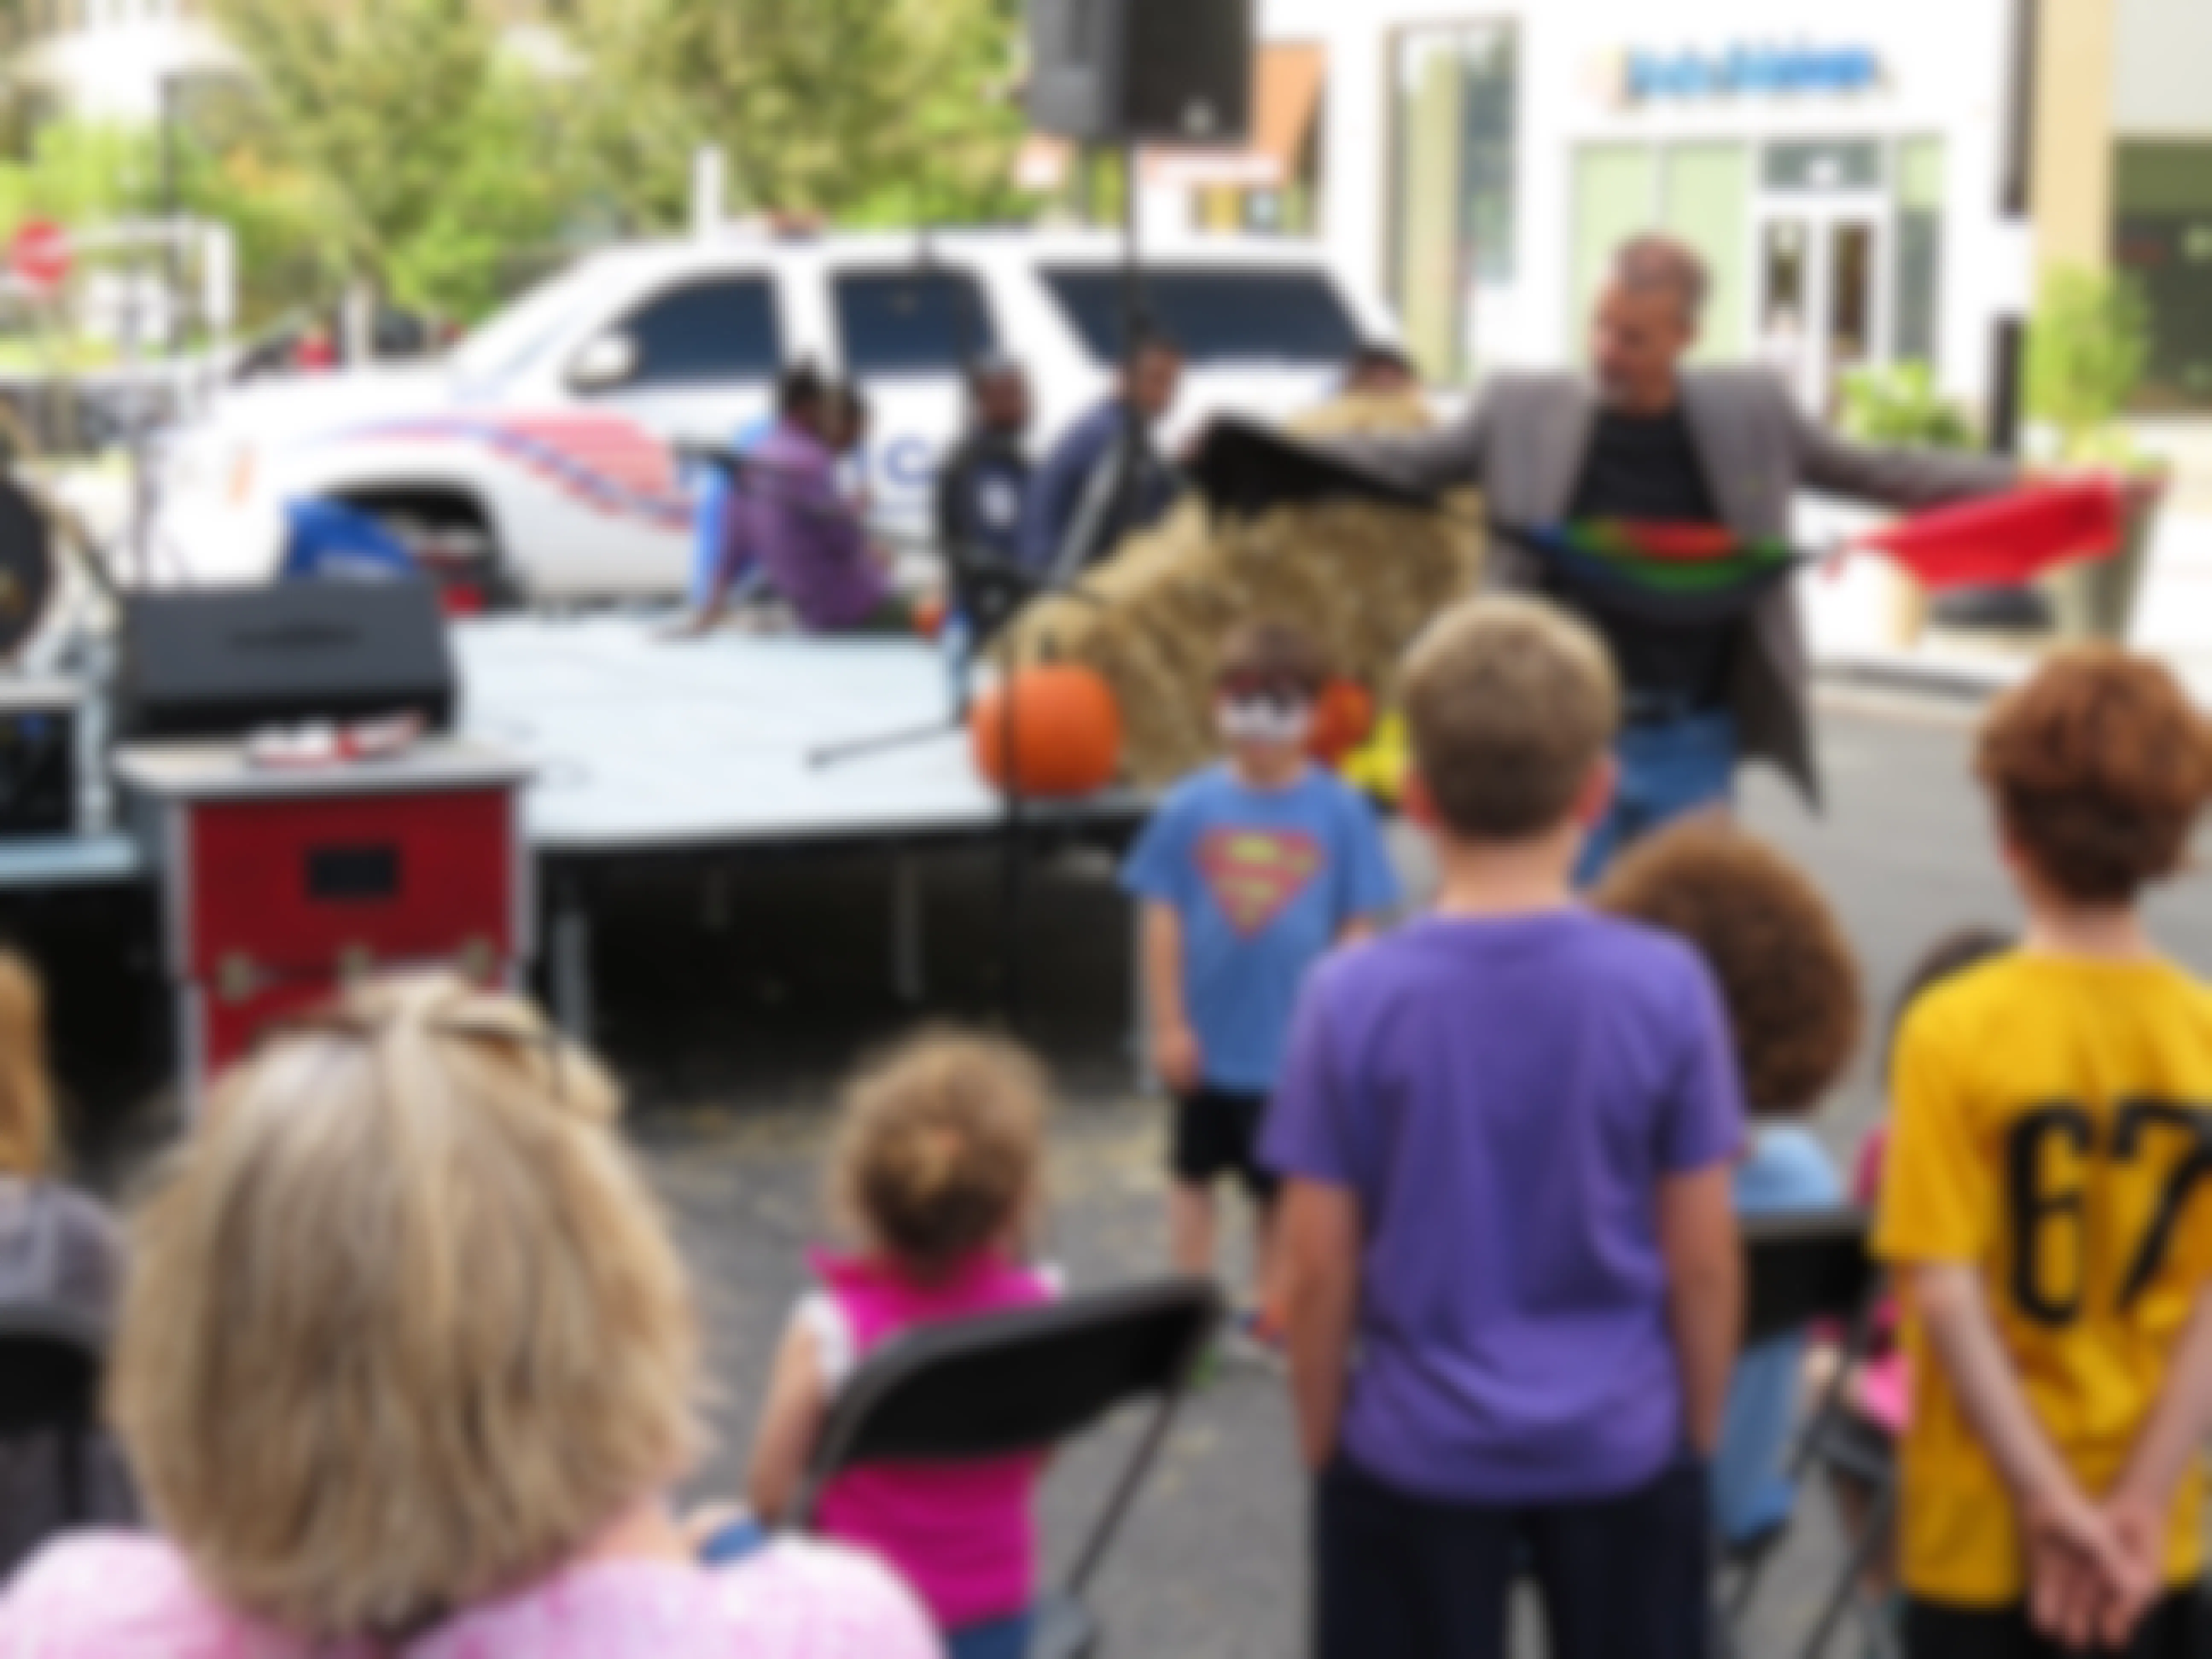 A magician performing a magic trick at a fall festival with children watching.